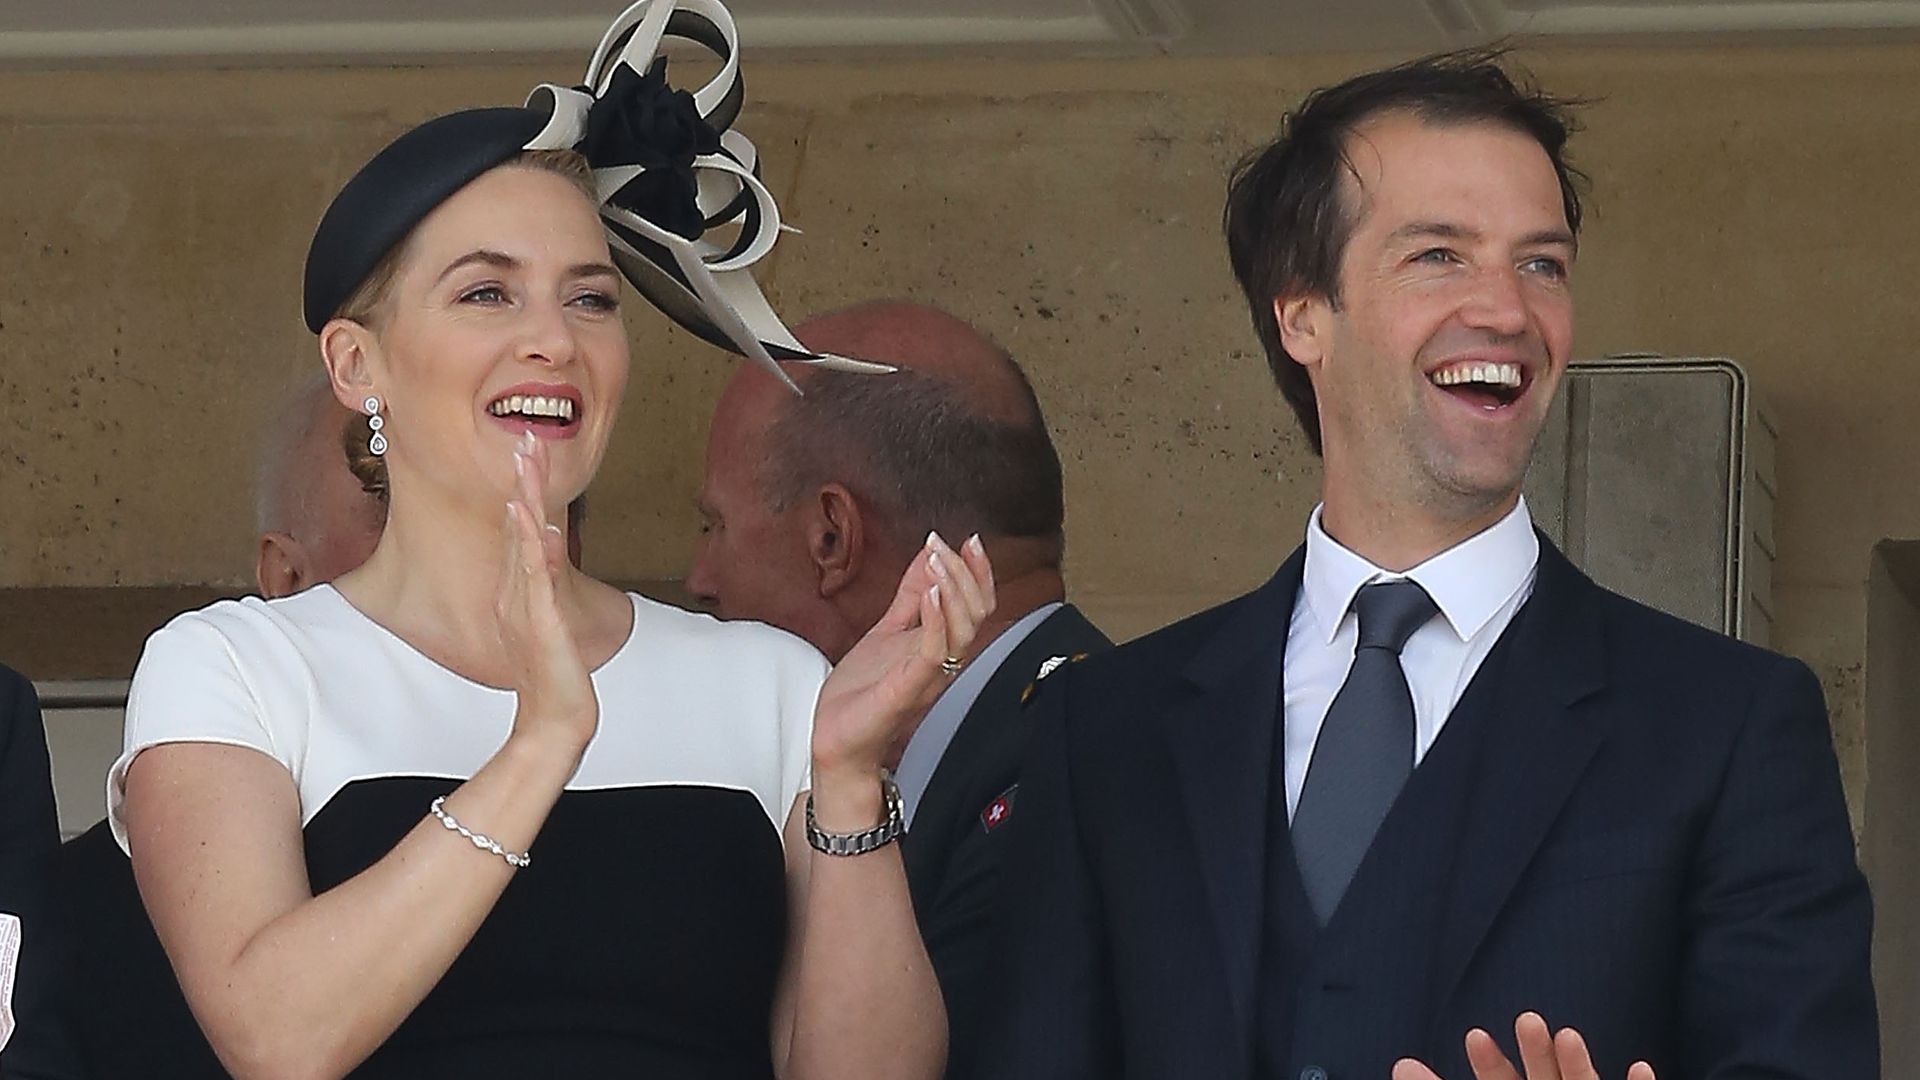 Kate and Edward at a balcony smiling and clapping while watching horse racing